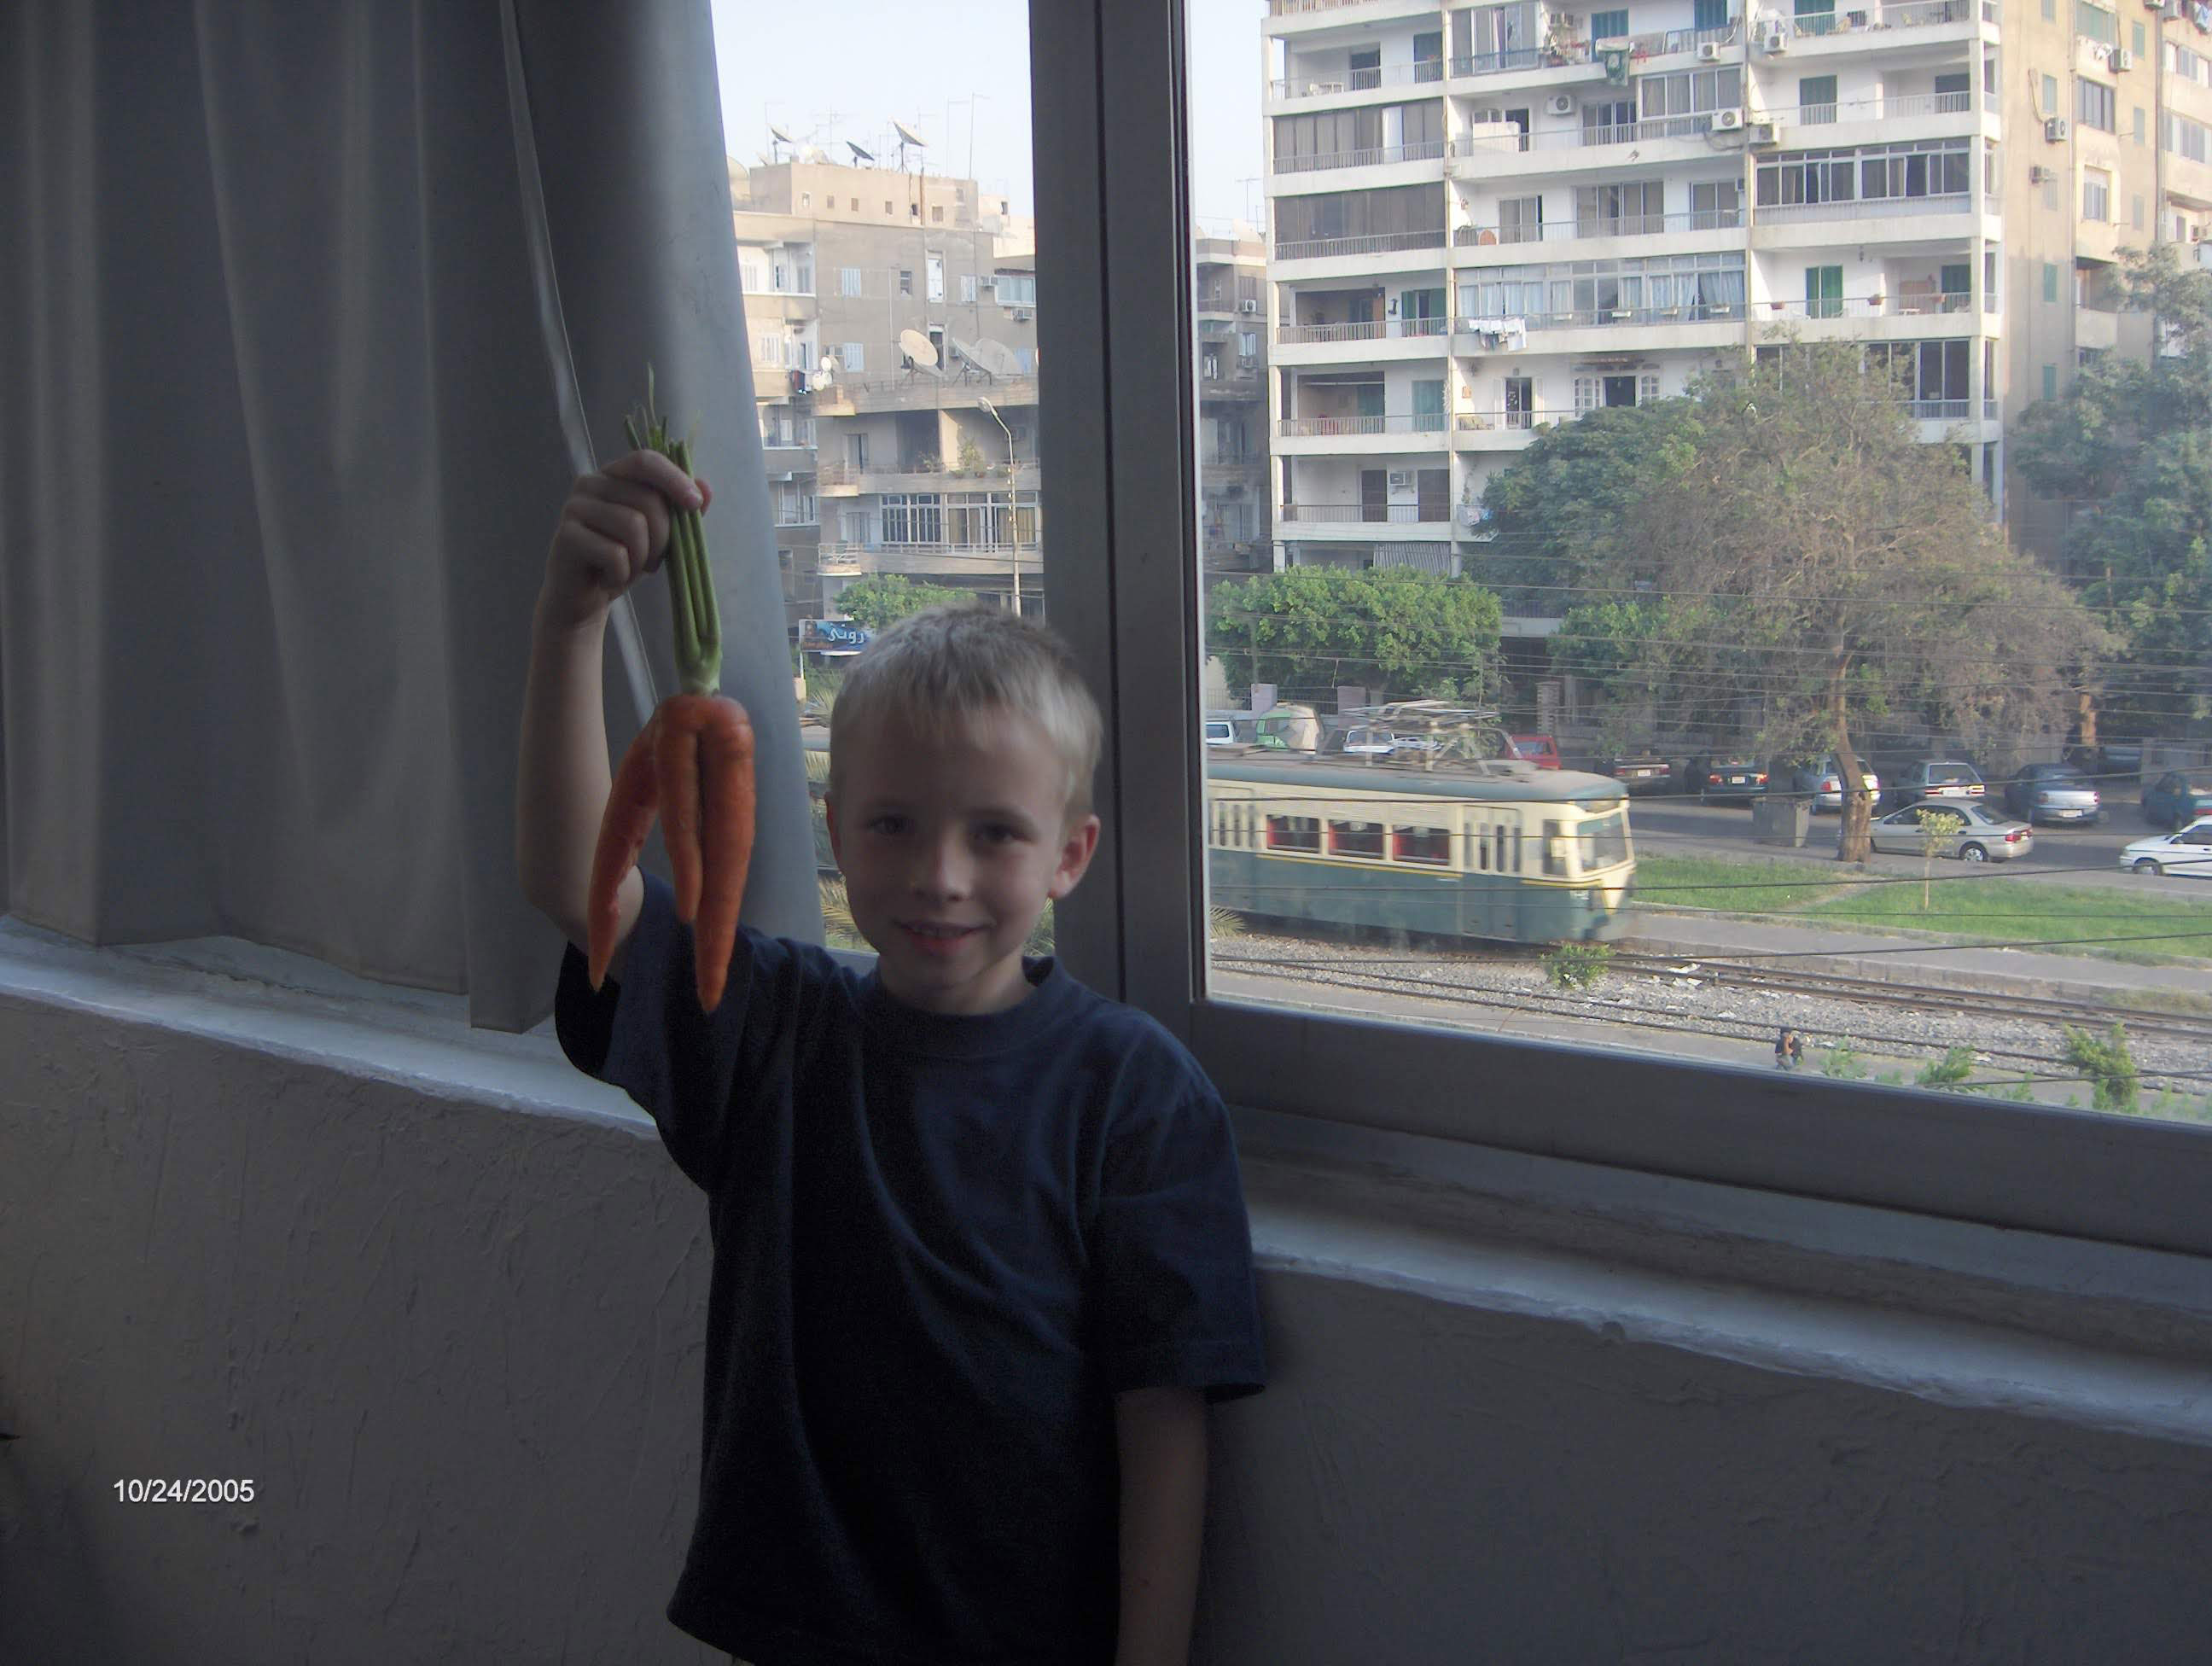 Clayton with “alien carrots” on our balcony overlooking the local metro train tracks